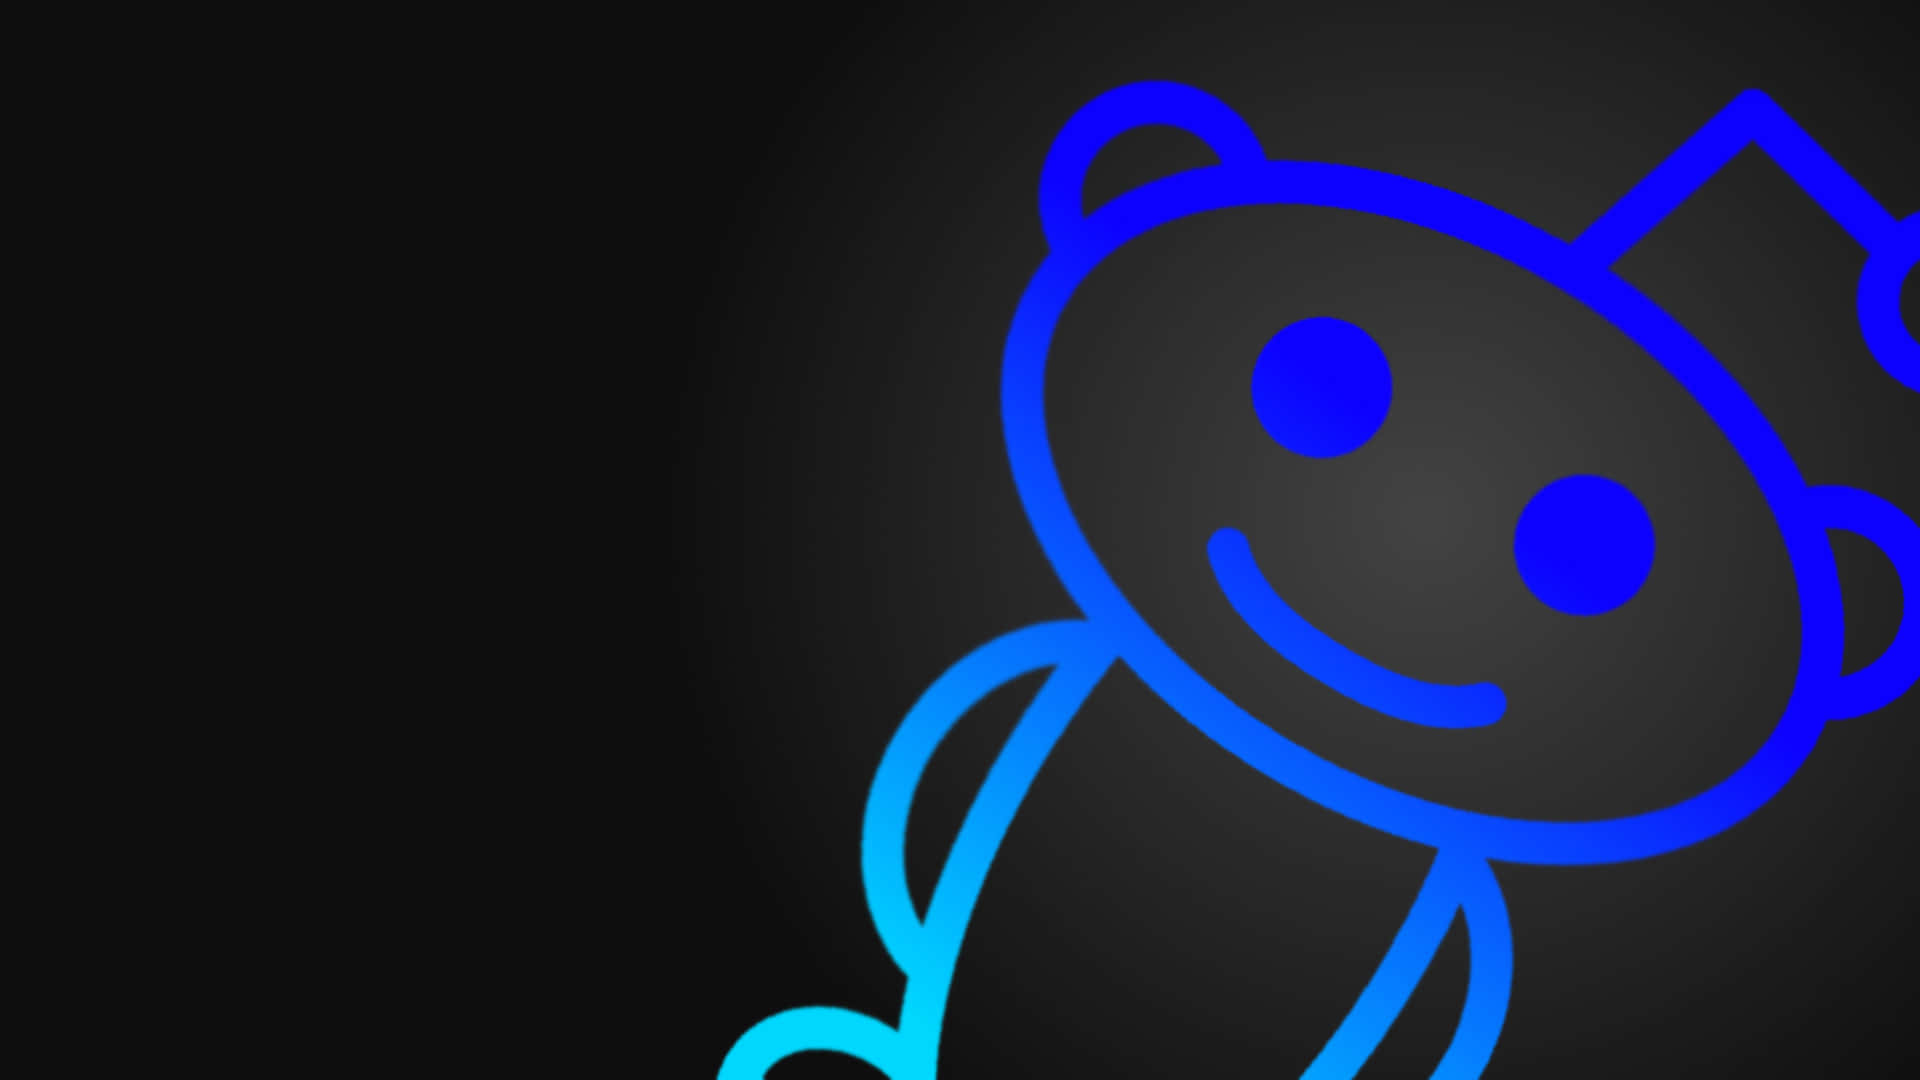 A Blue And White Teddy Bear Logo On A Black Background